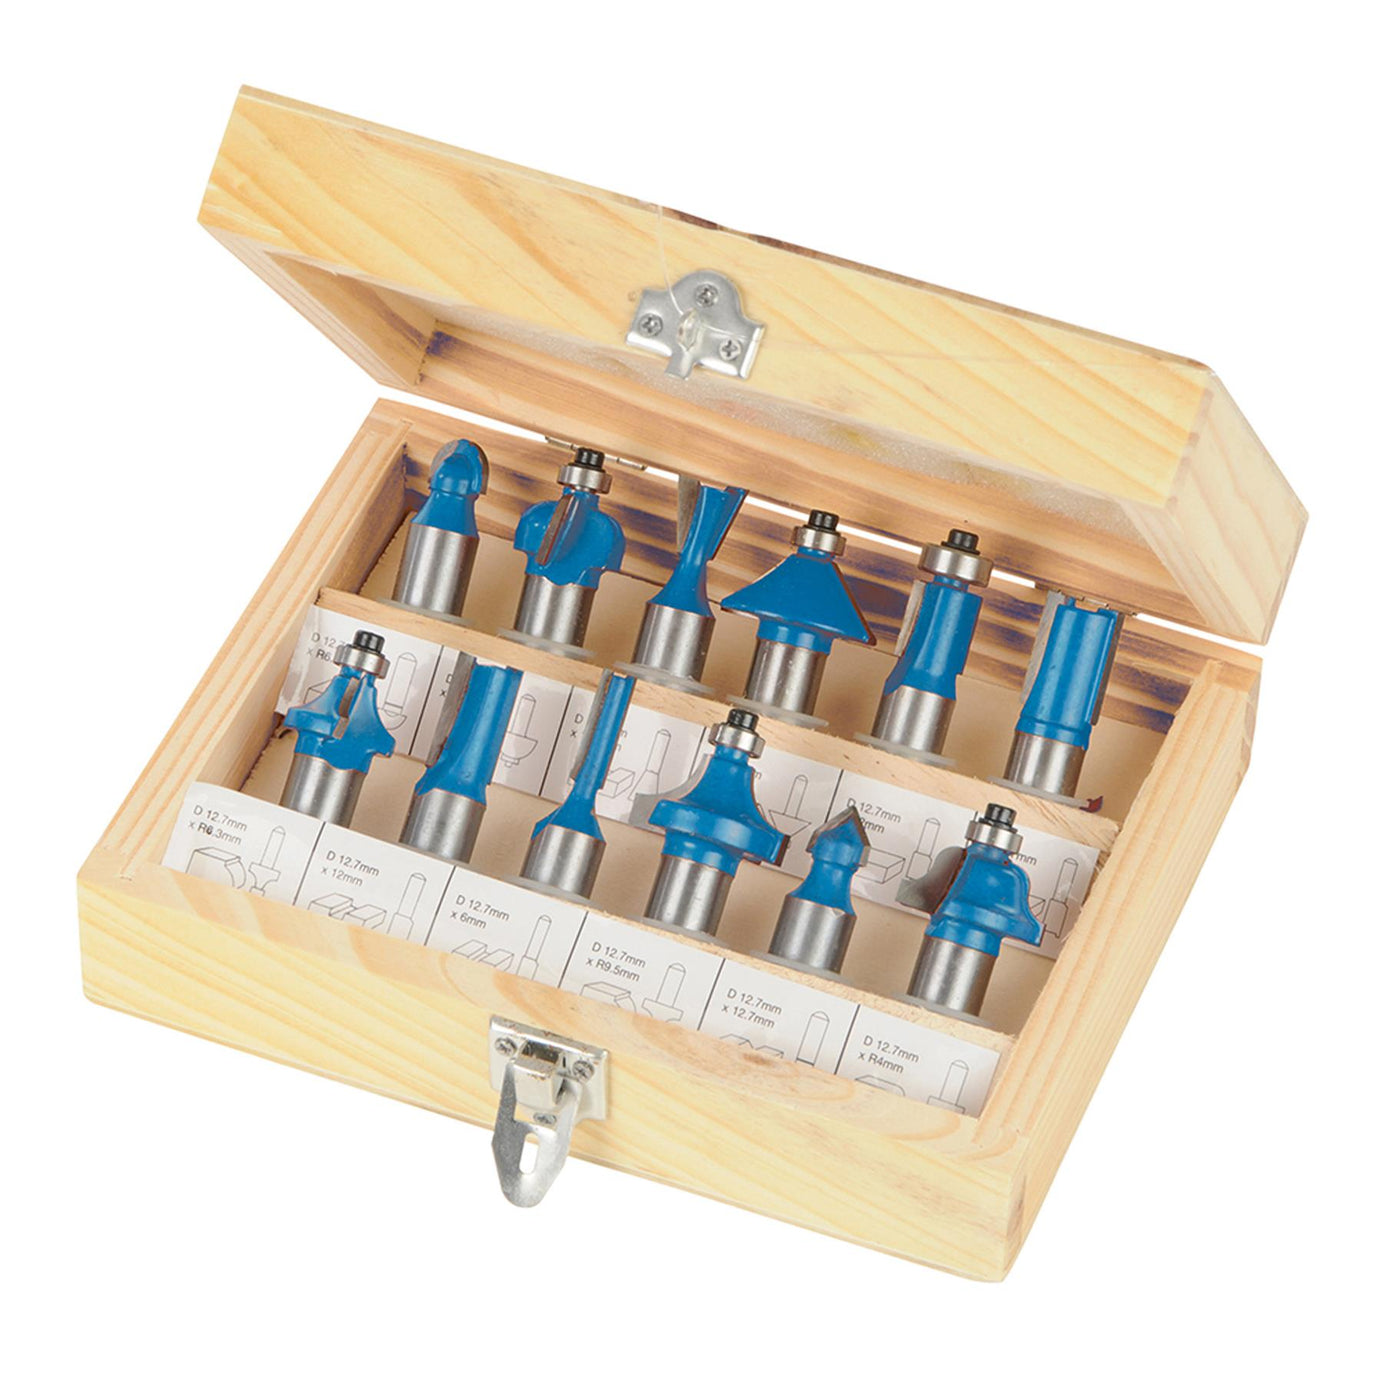 ?1/2" Inch TCT Router Bit Set 12 pce?Piece Cutters Kit in Wooden Box/Case